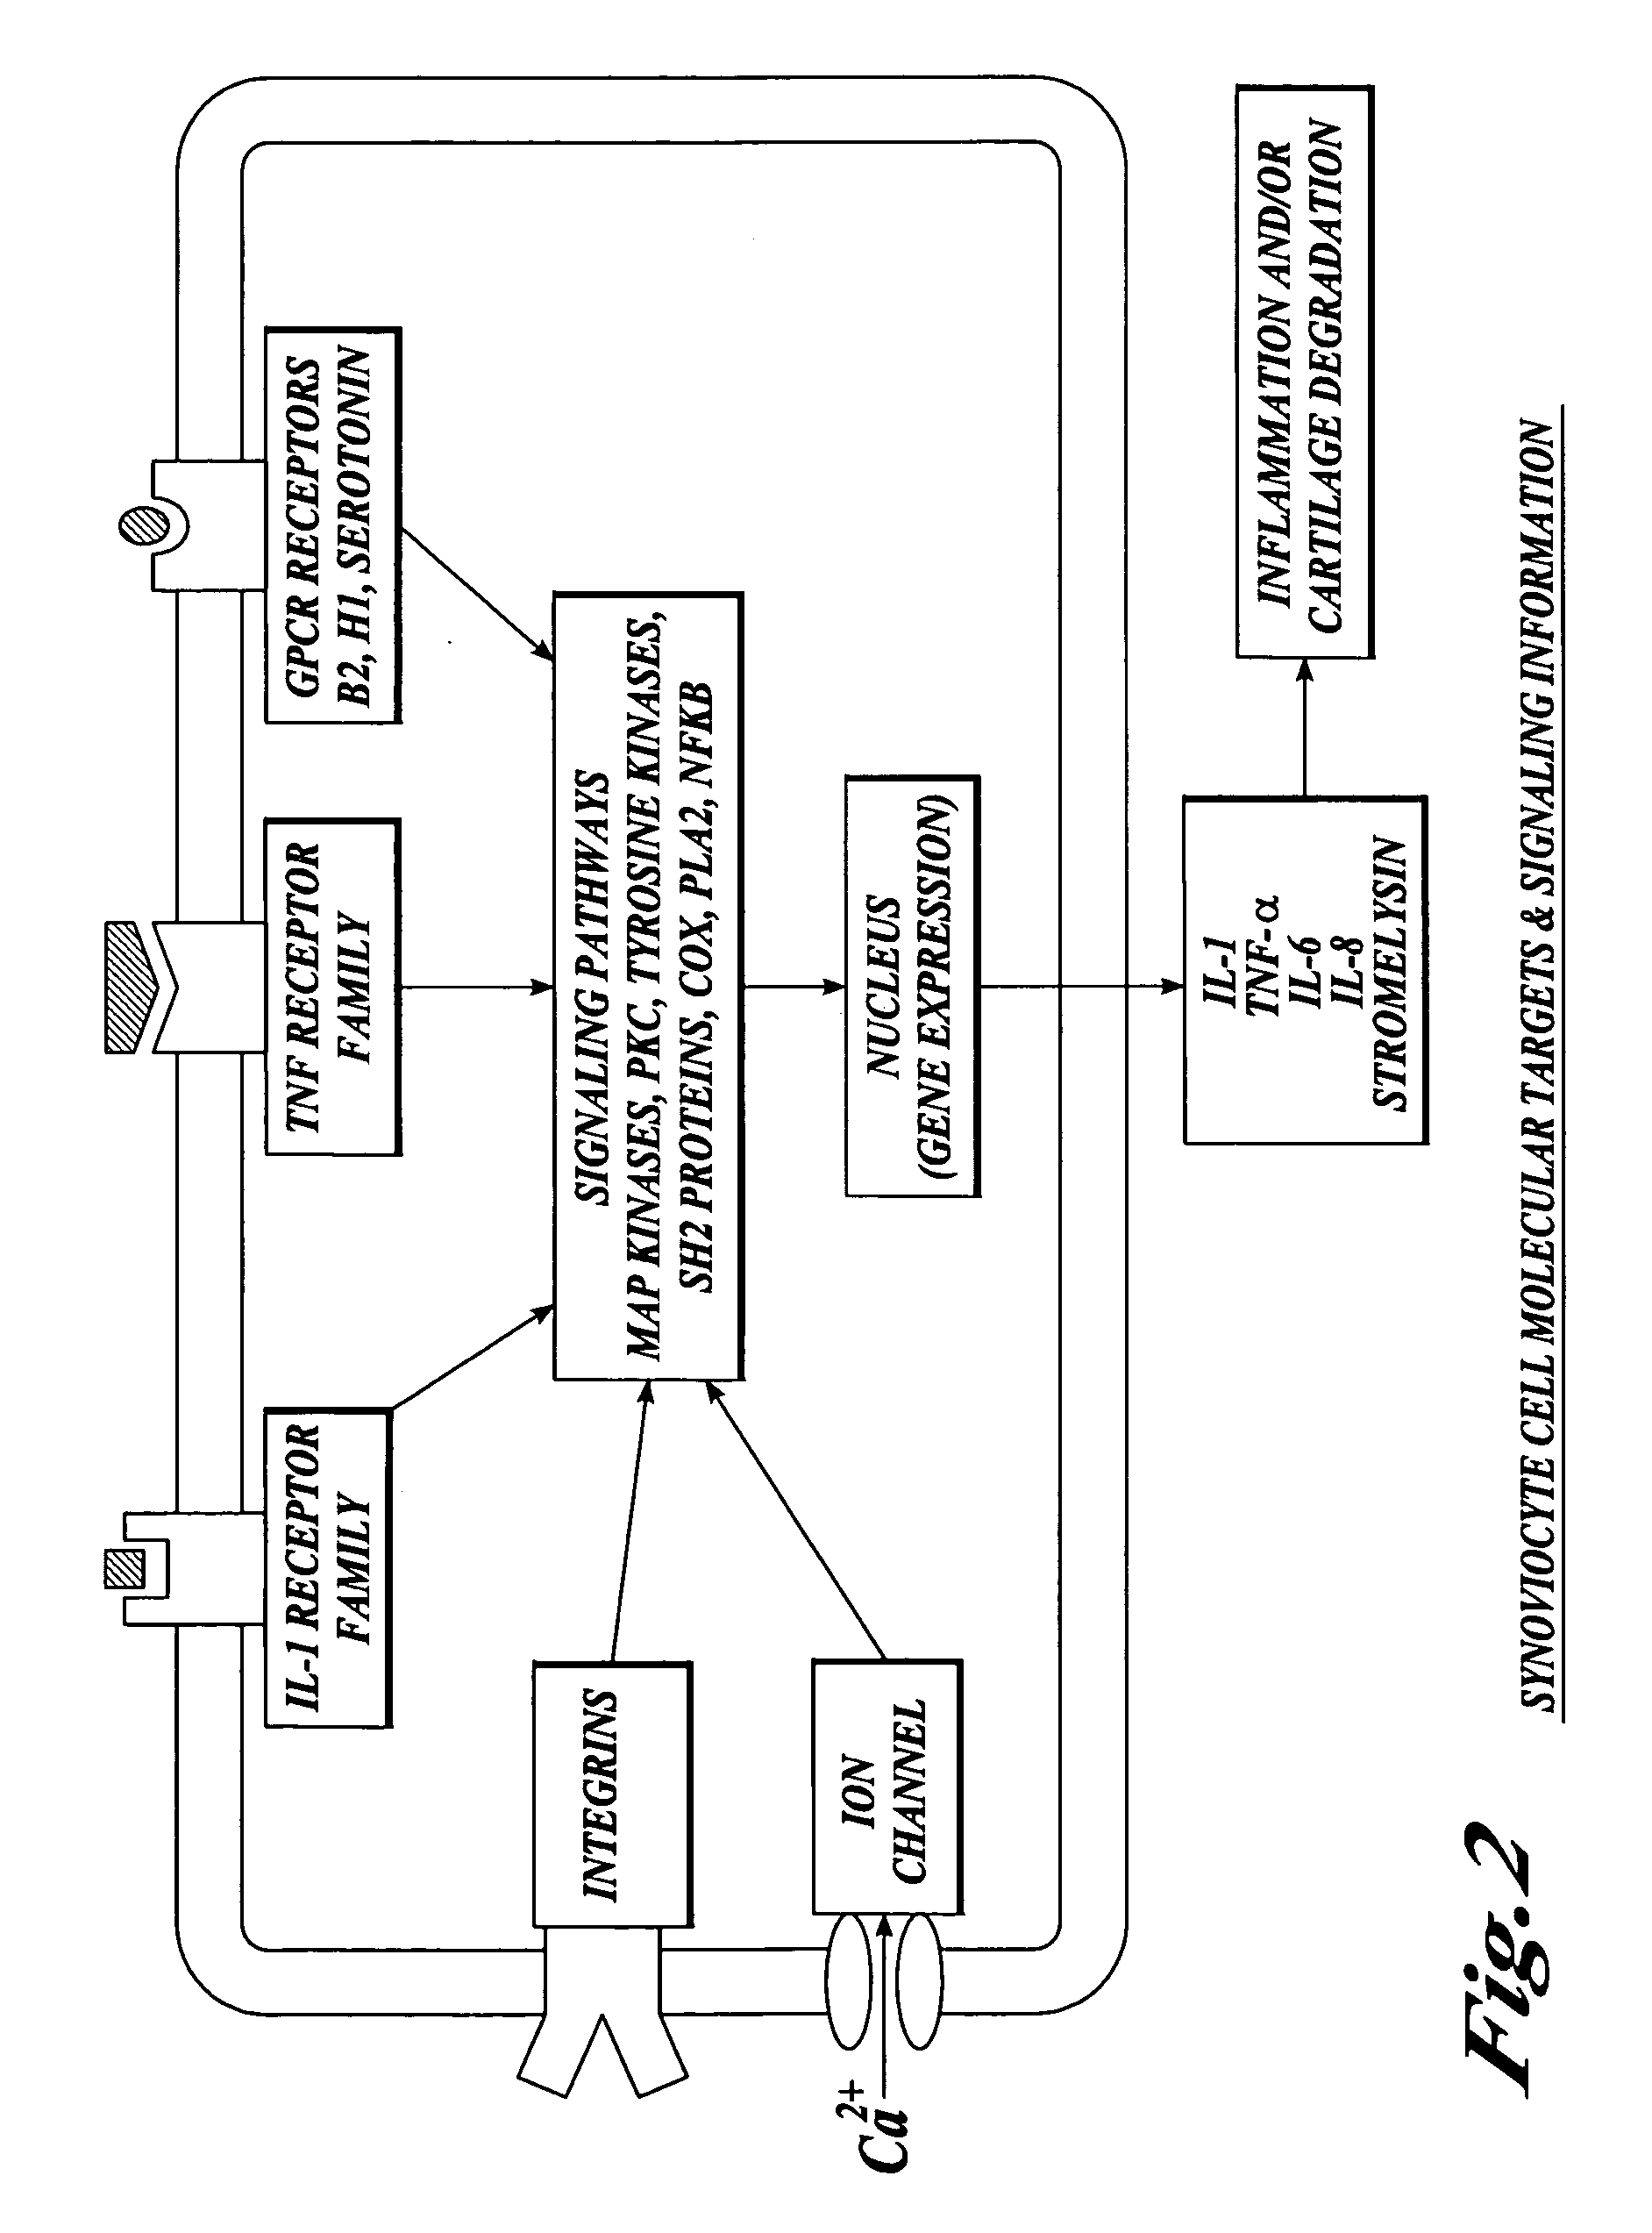 Compositions and methods for systemic inhibition of cartilage degradation